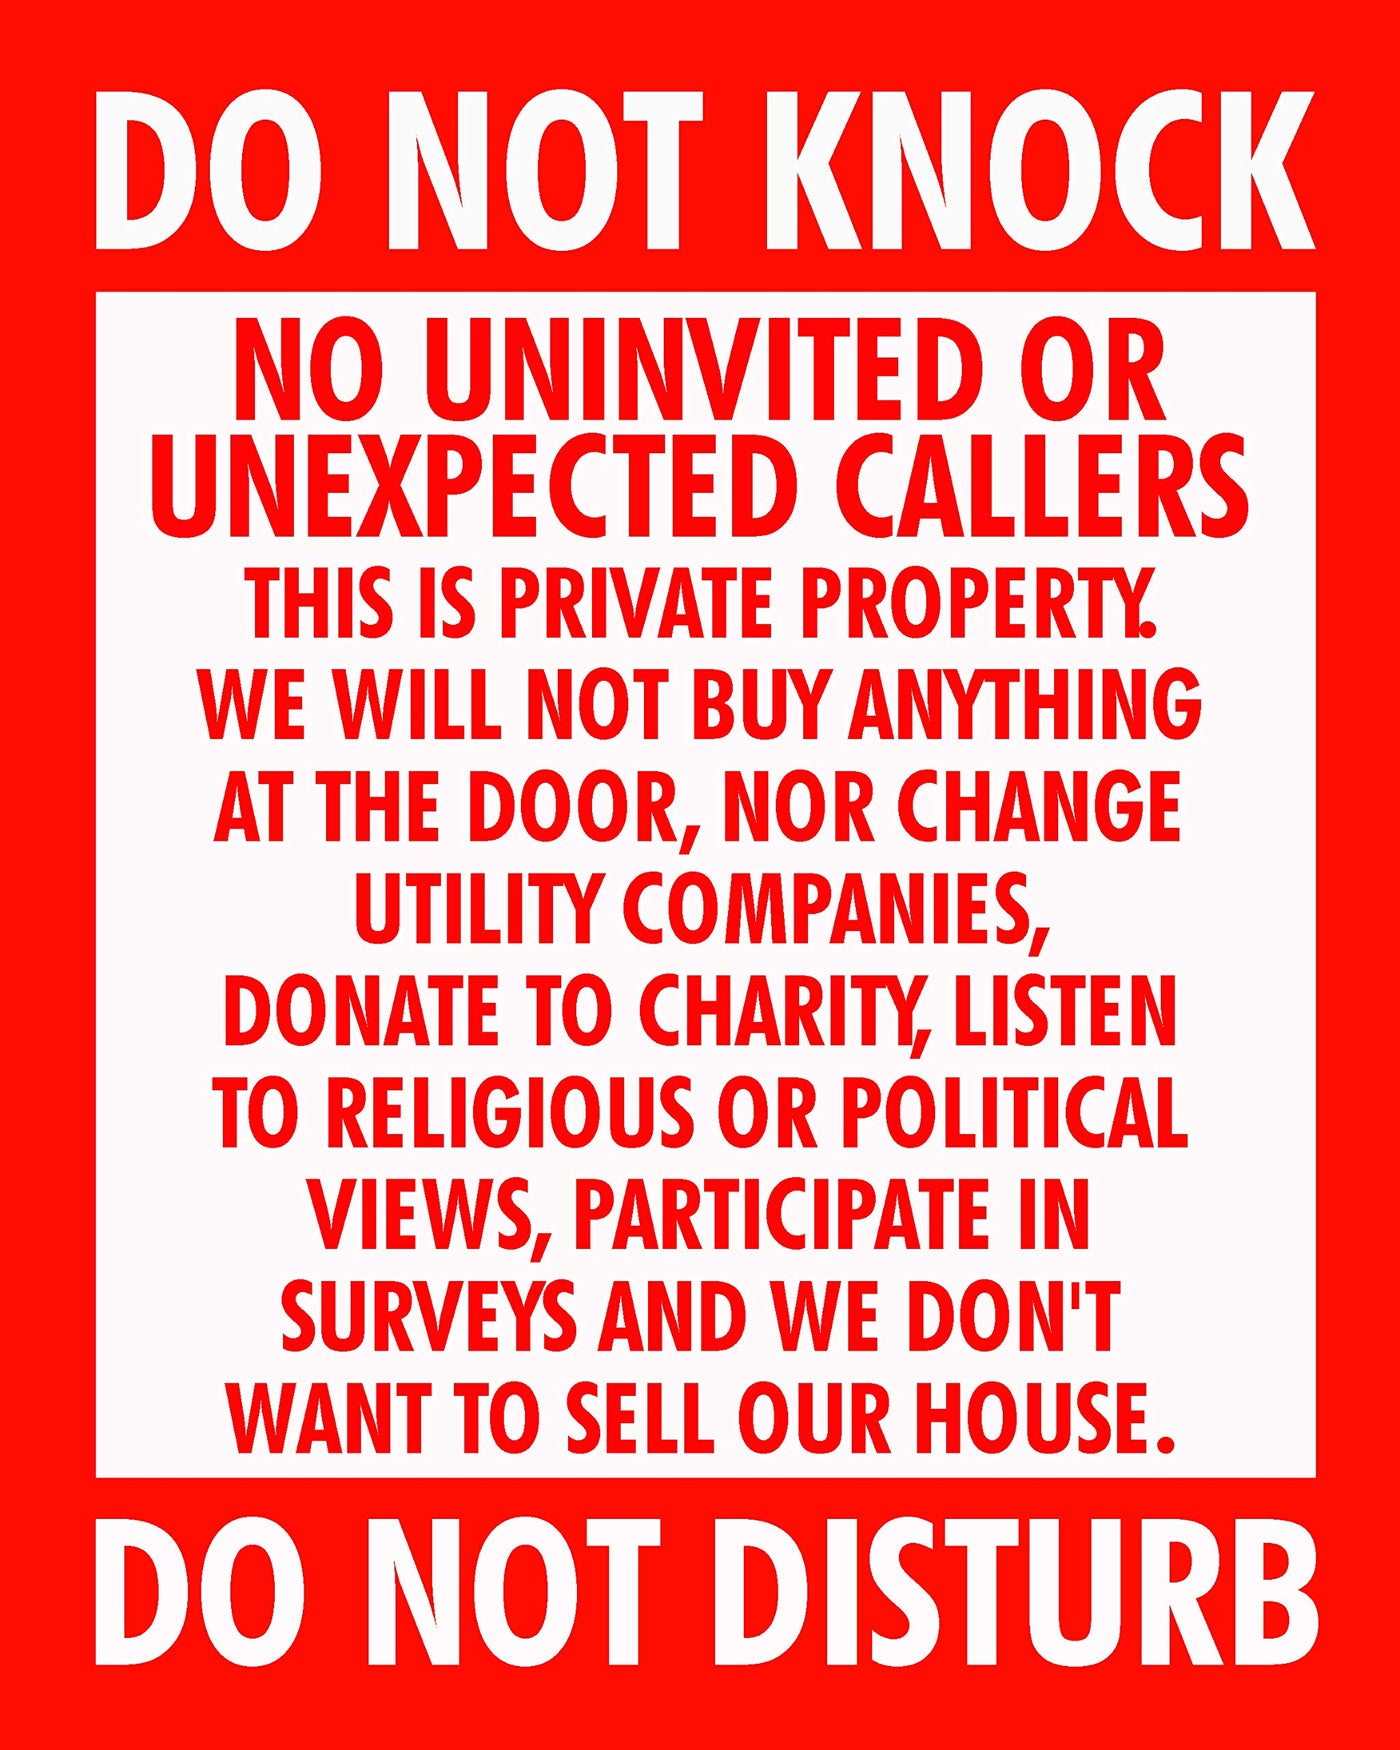 Do Not Knock-Do Not Disturb Funny No Soliciting Front Door Sign-8 x 10" Sarcastic Wall Art Print-Ready to Frame. Home-Office-Welcome-Man Cave Decor. Great Novelty Sign-Fun Gift!